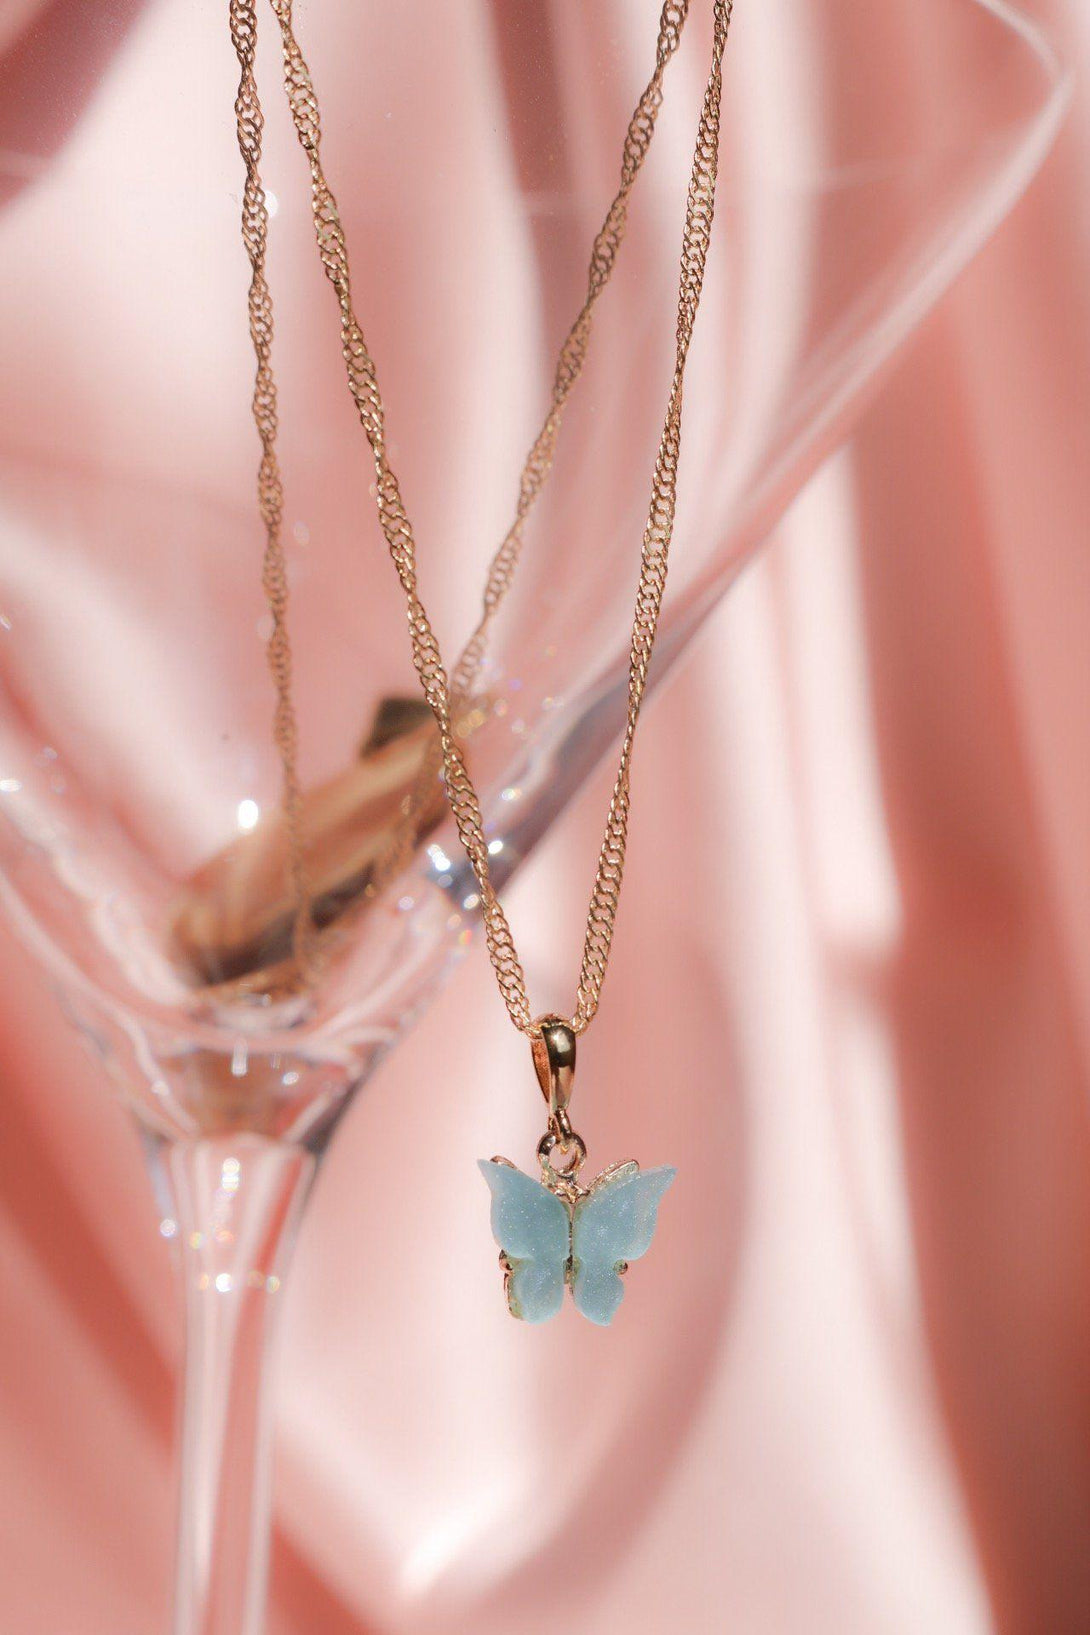 Trendy Chic Butterfly Pendant Necklace - Bling Little Thing